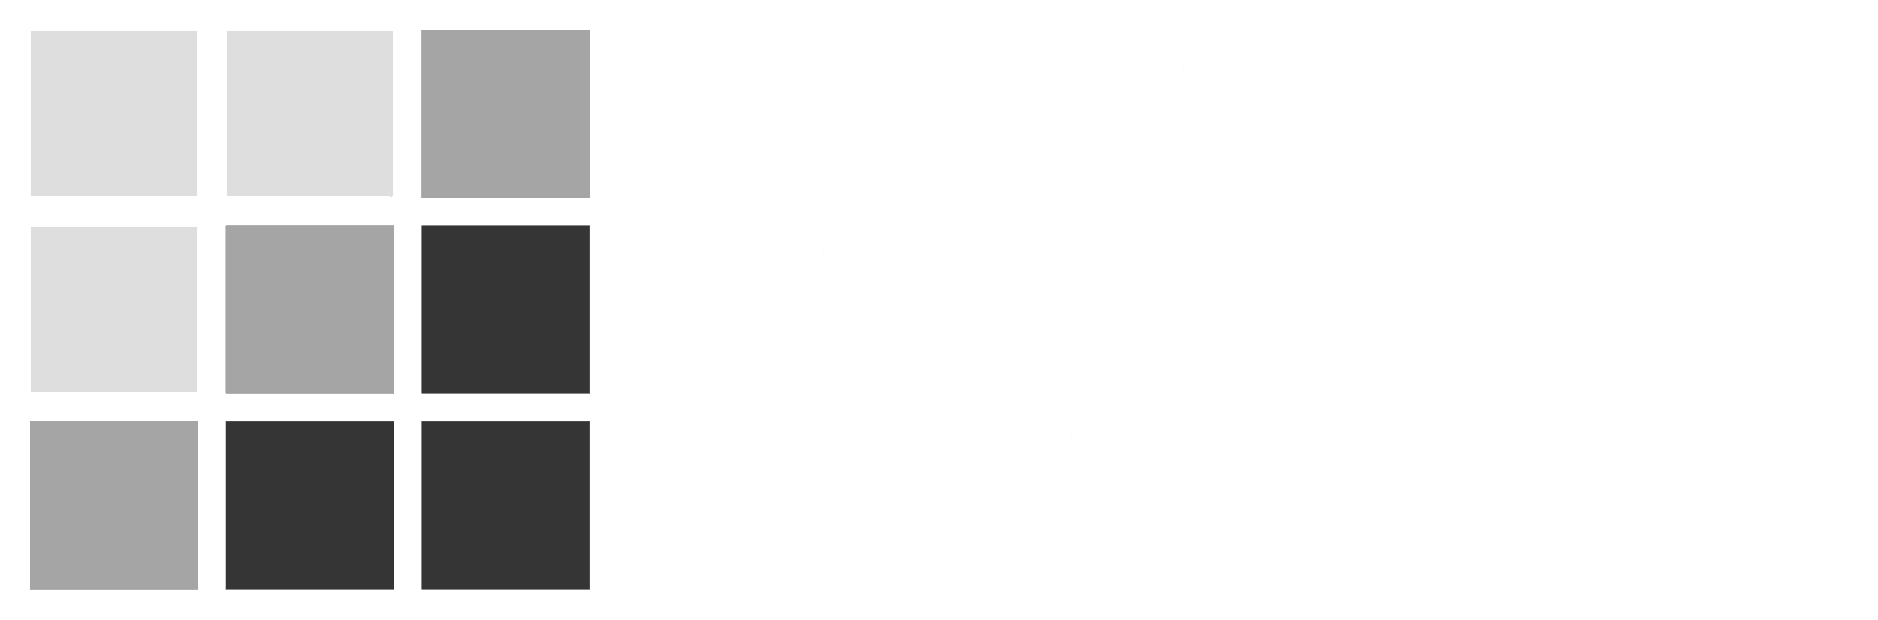 Accounting Business Service